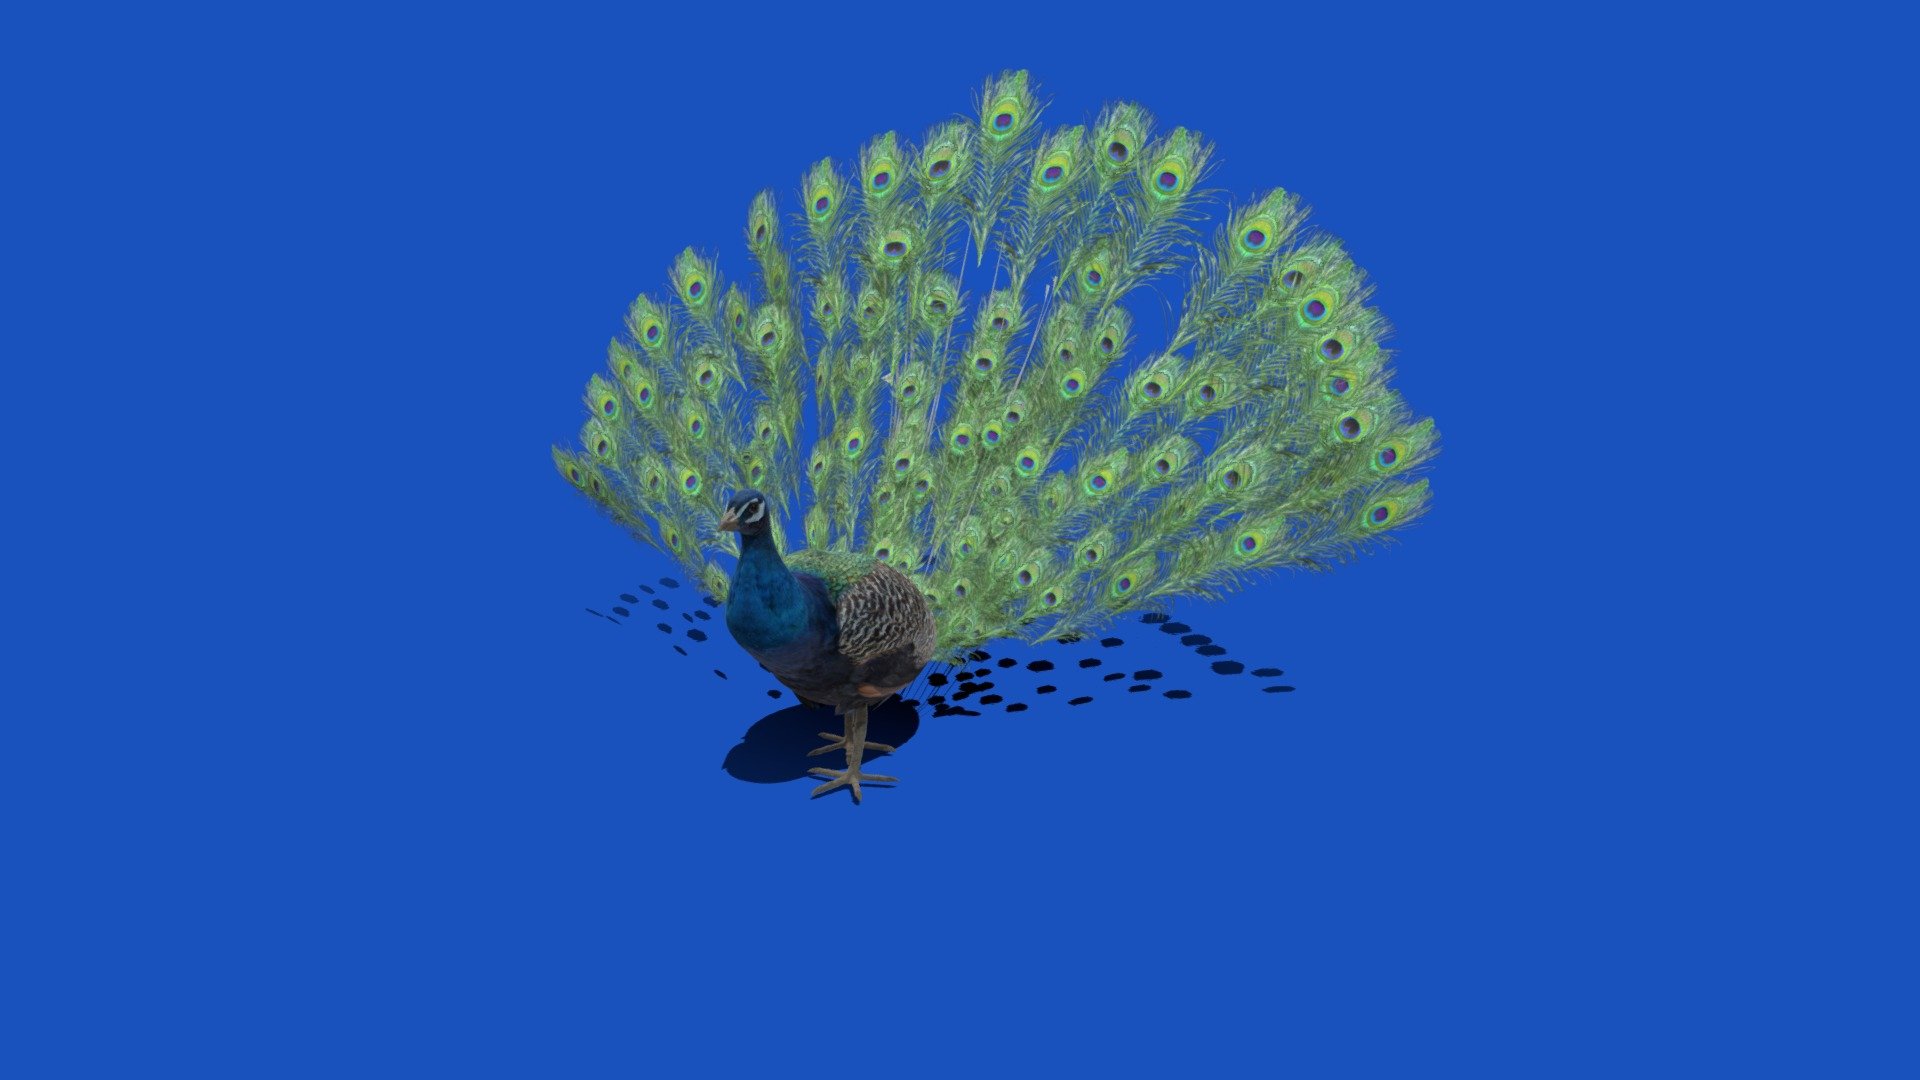 For Store
Peacock is a common name for three bird species in the genera Pavo and Afropavo within the tribe Pavonini of the family Phasianidae, the pheasants and their allies.

Buy model here

 - Peacock - 3D model by Beautiful Animals (nyilonelycompany + theappgod) (@beautifulanimals) 3d model